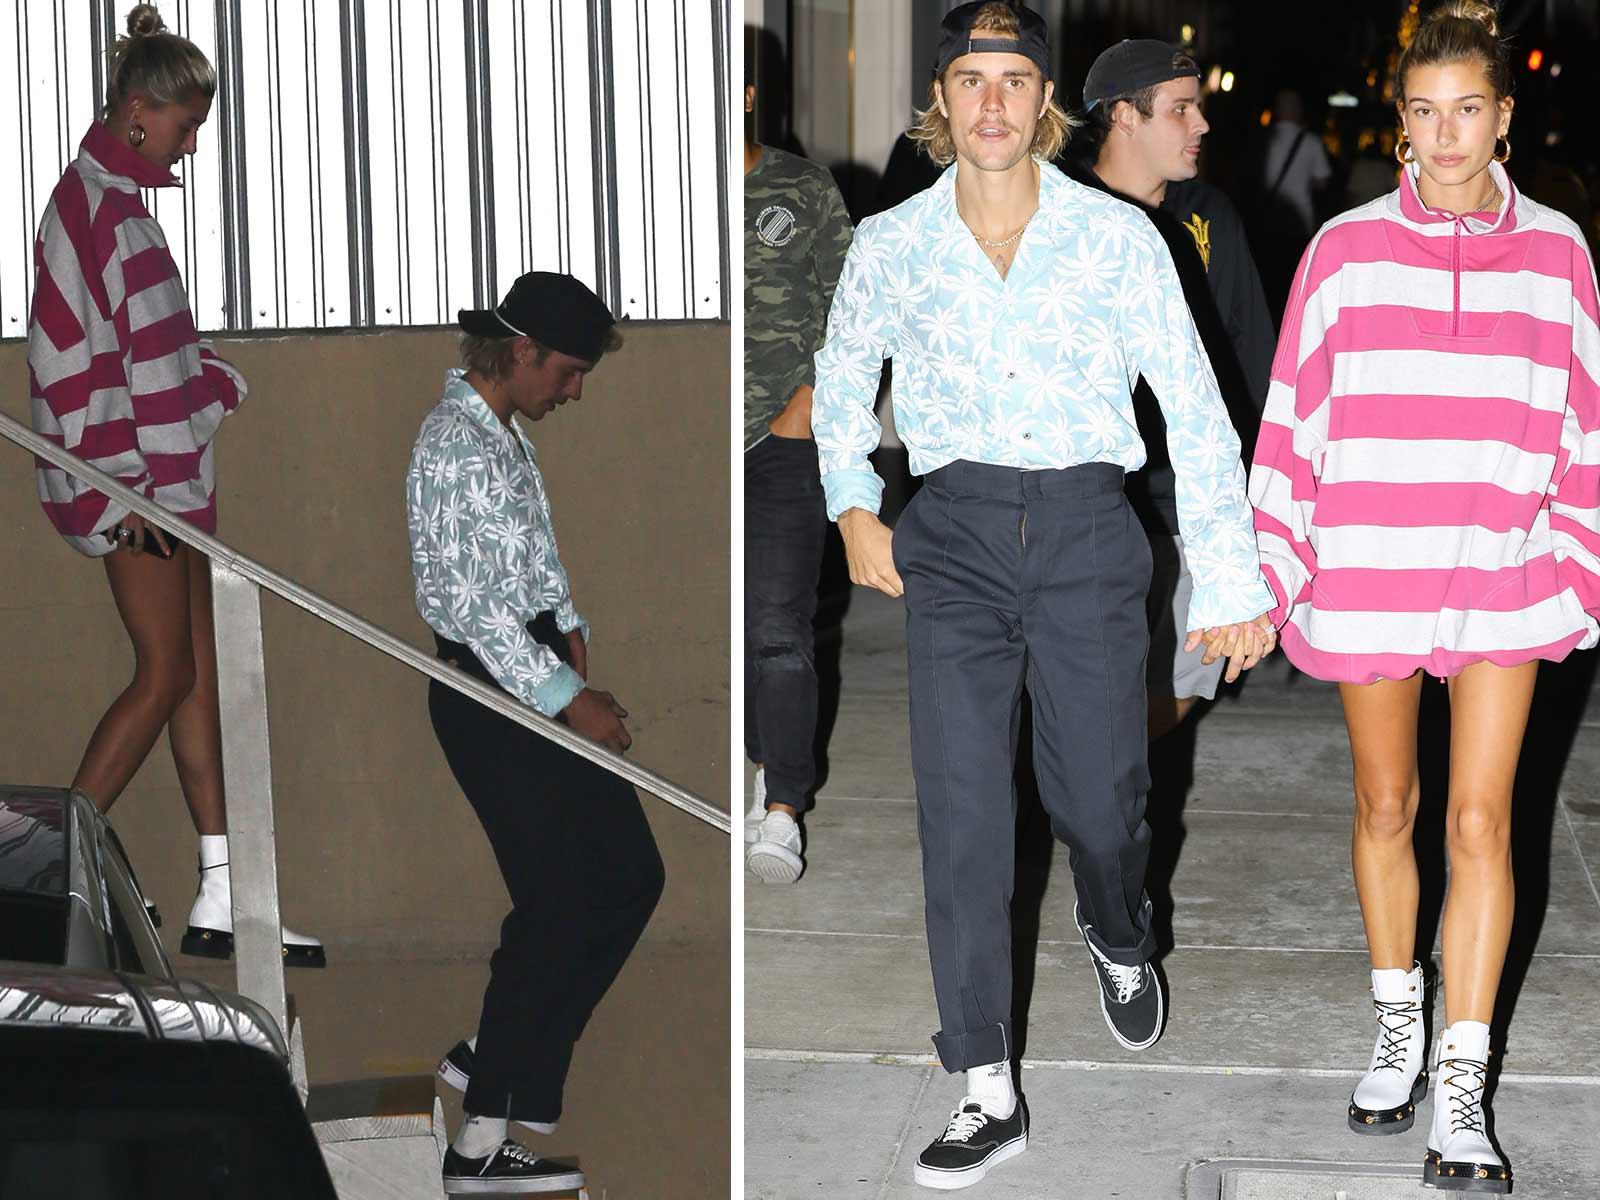 Justin Bieber: ‘No Brainer’ on Outfit Attire for Date With Hailey Baldwin